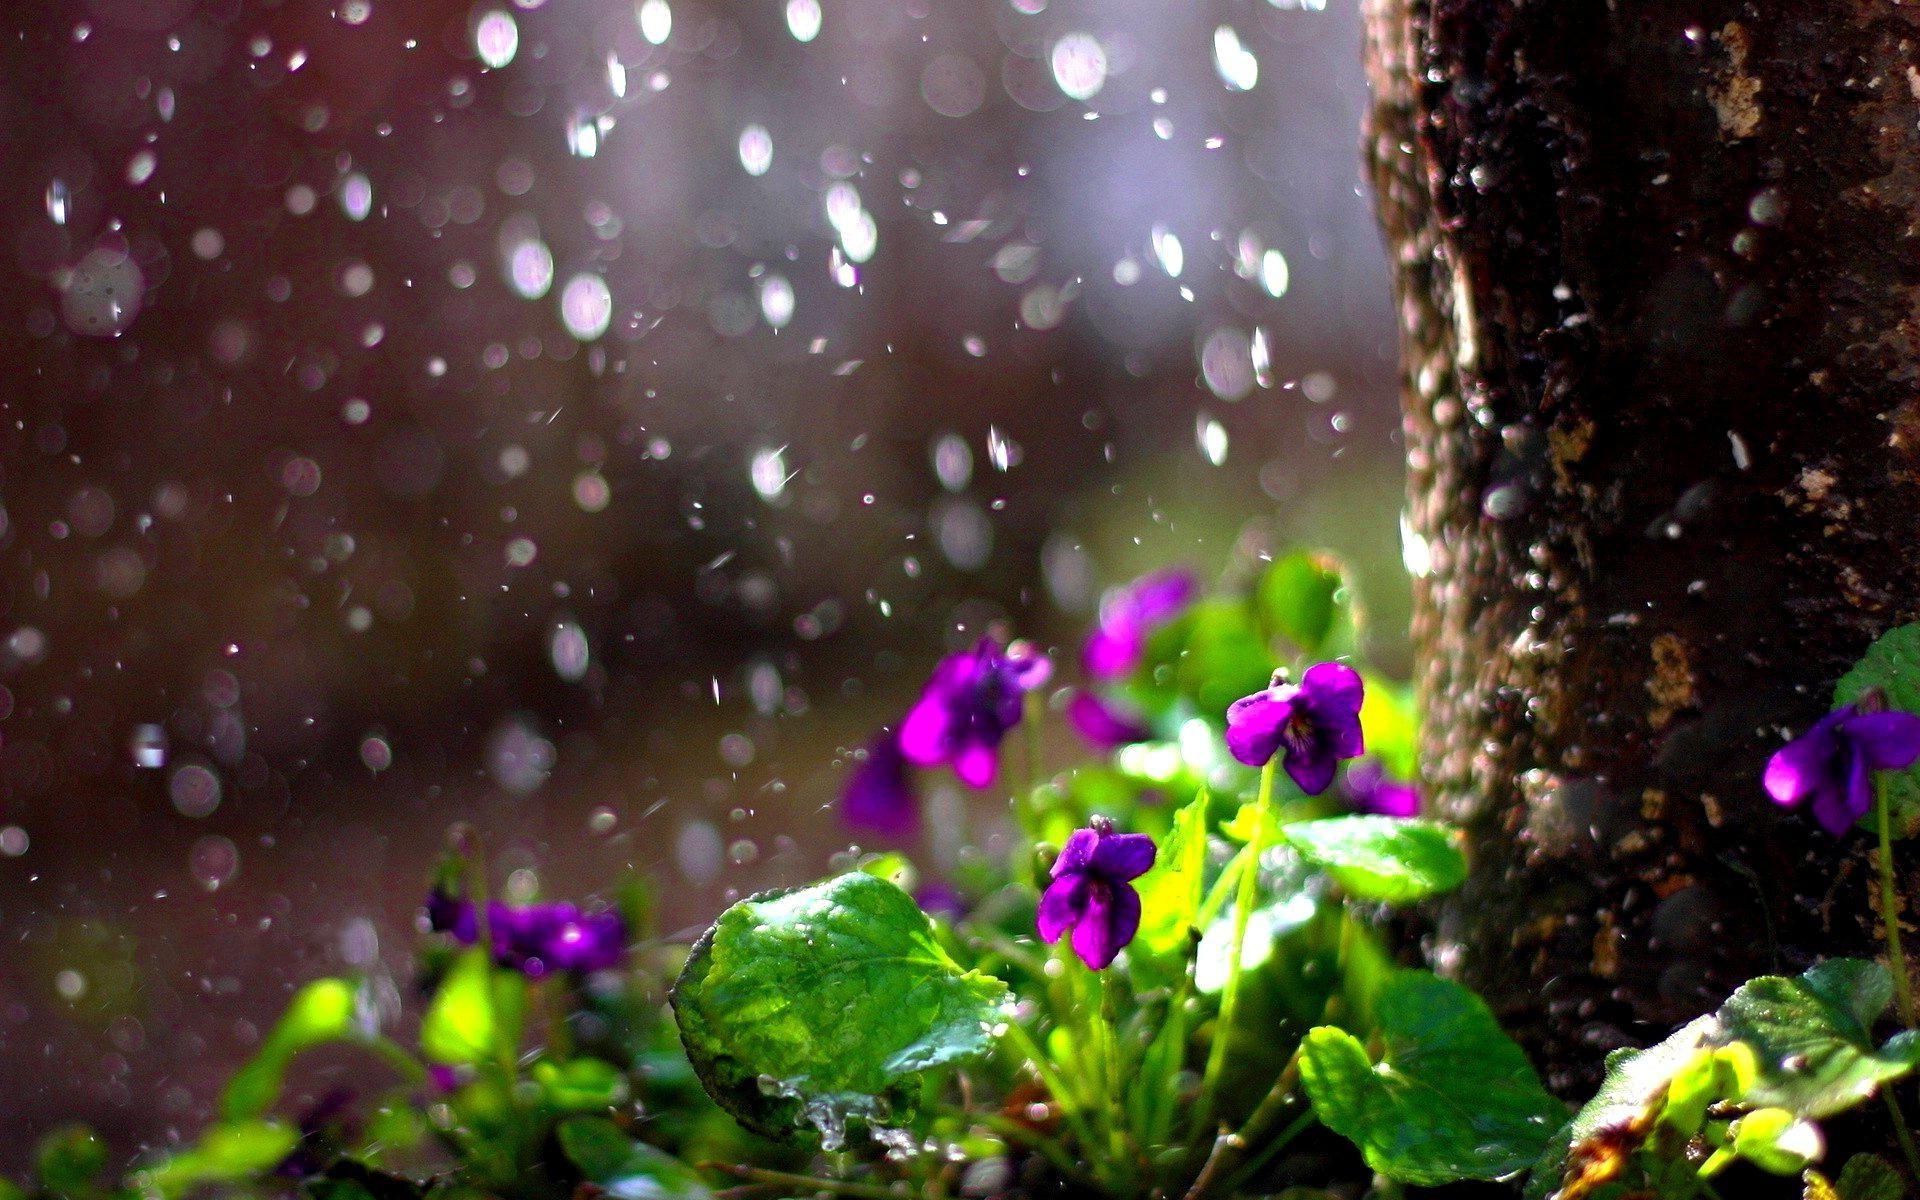 Beautiful Rain Drops With Quotes Wallpapers